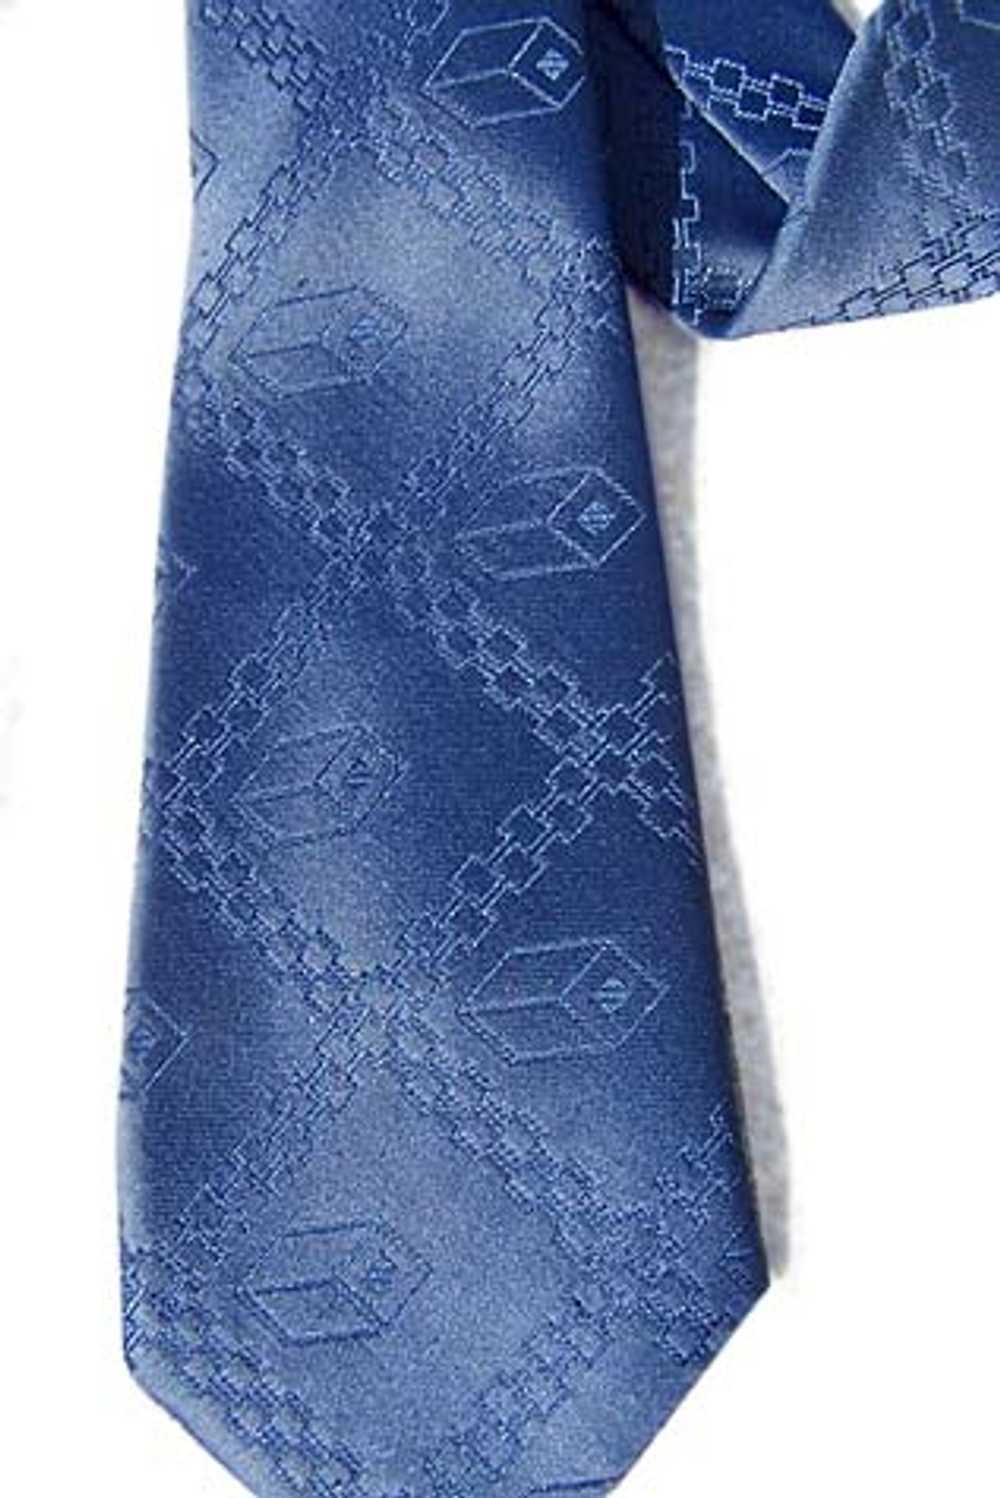 Sears mathematical mens' tie - image 3